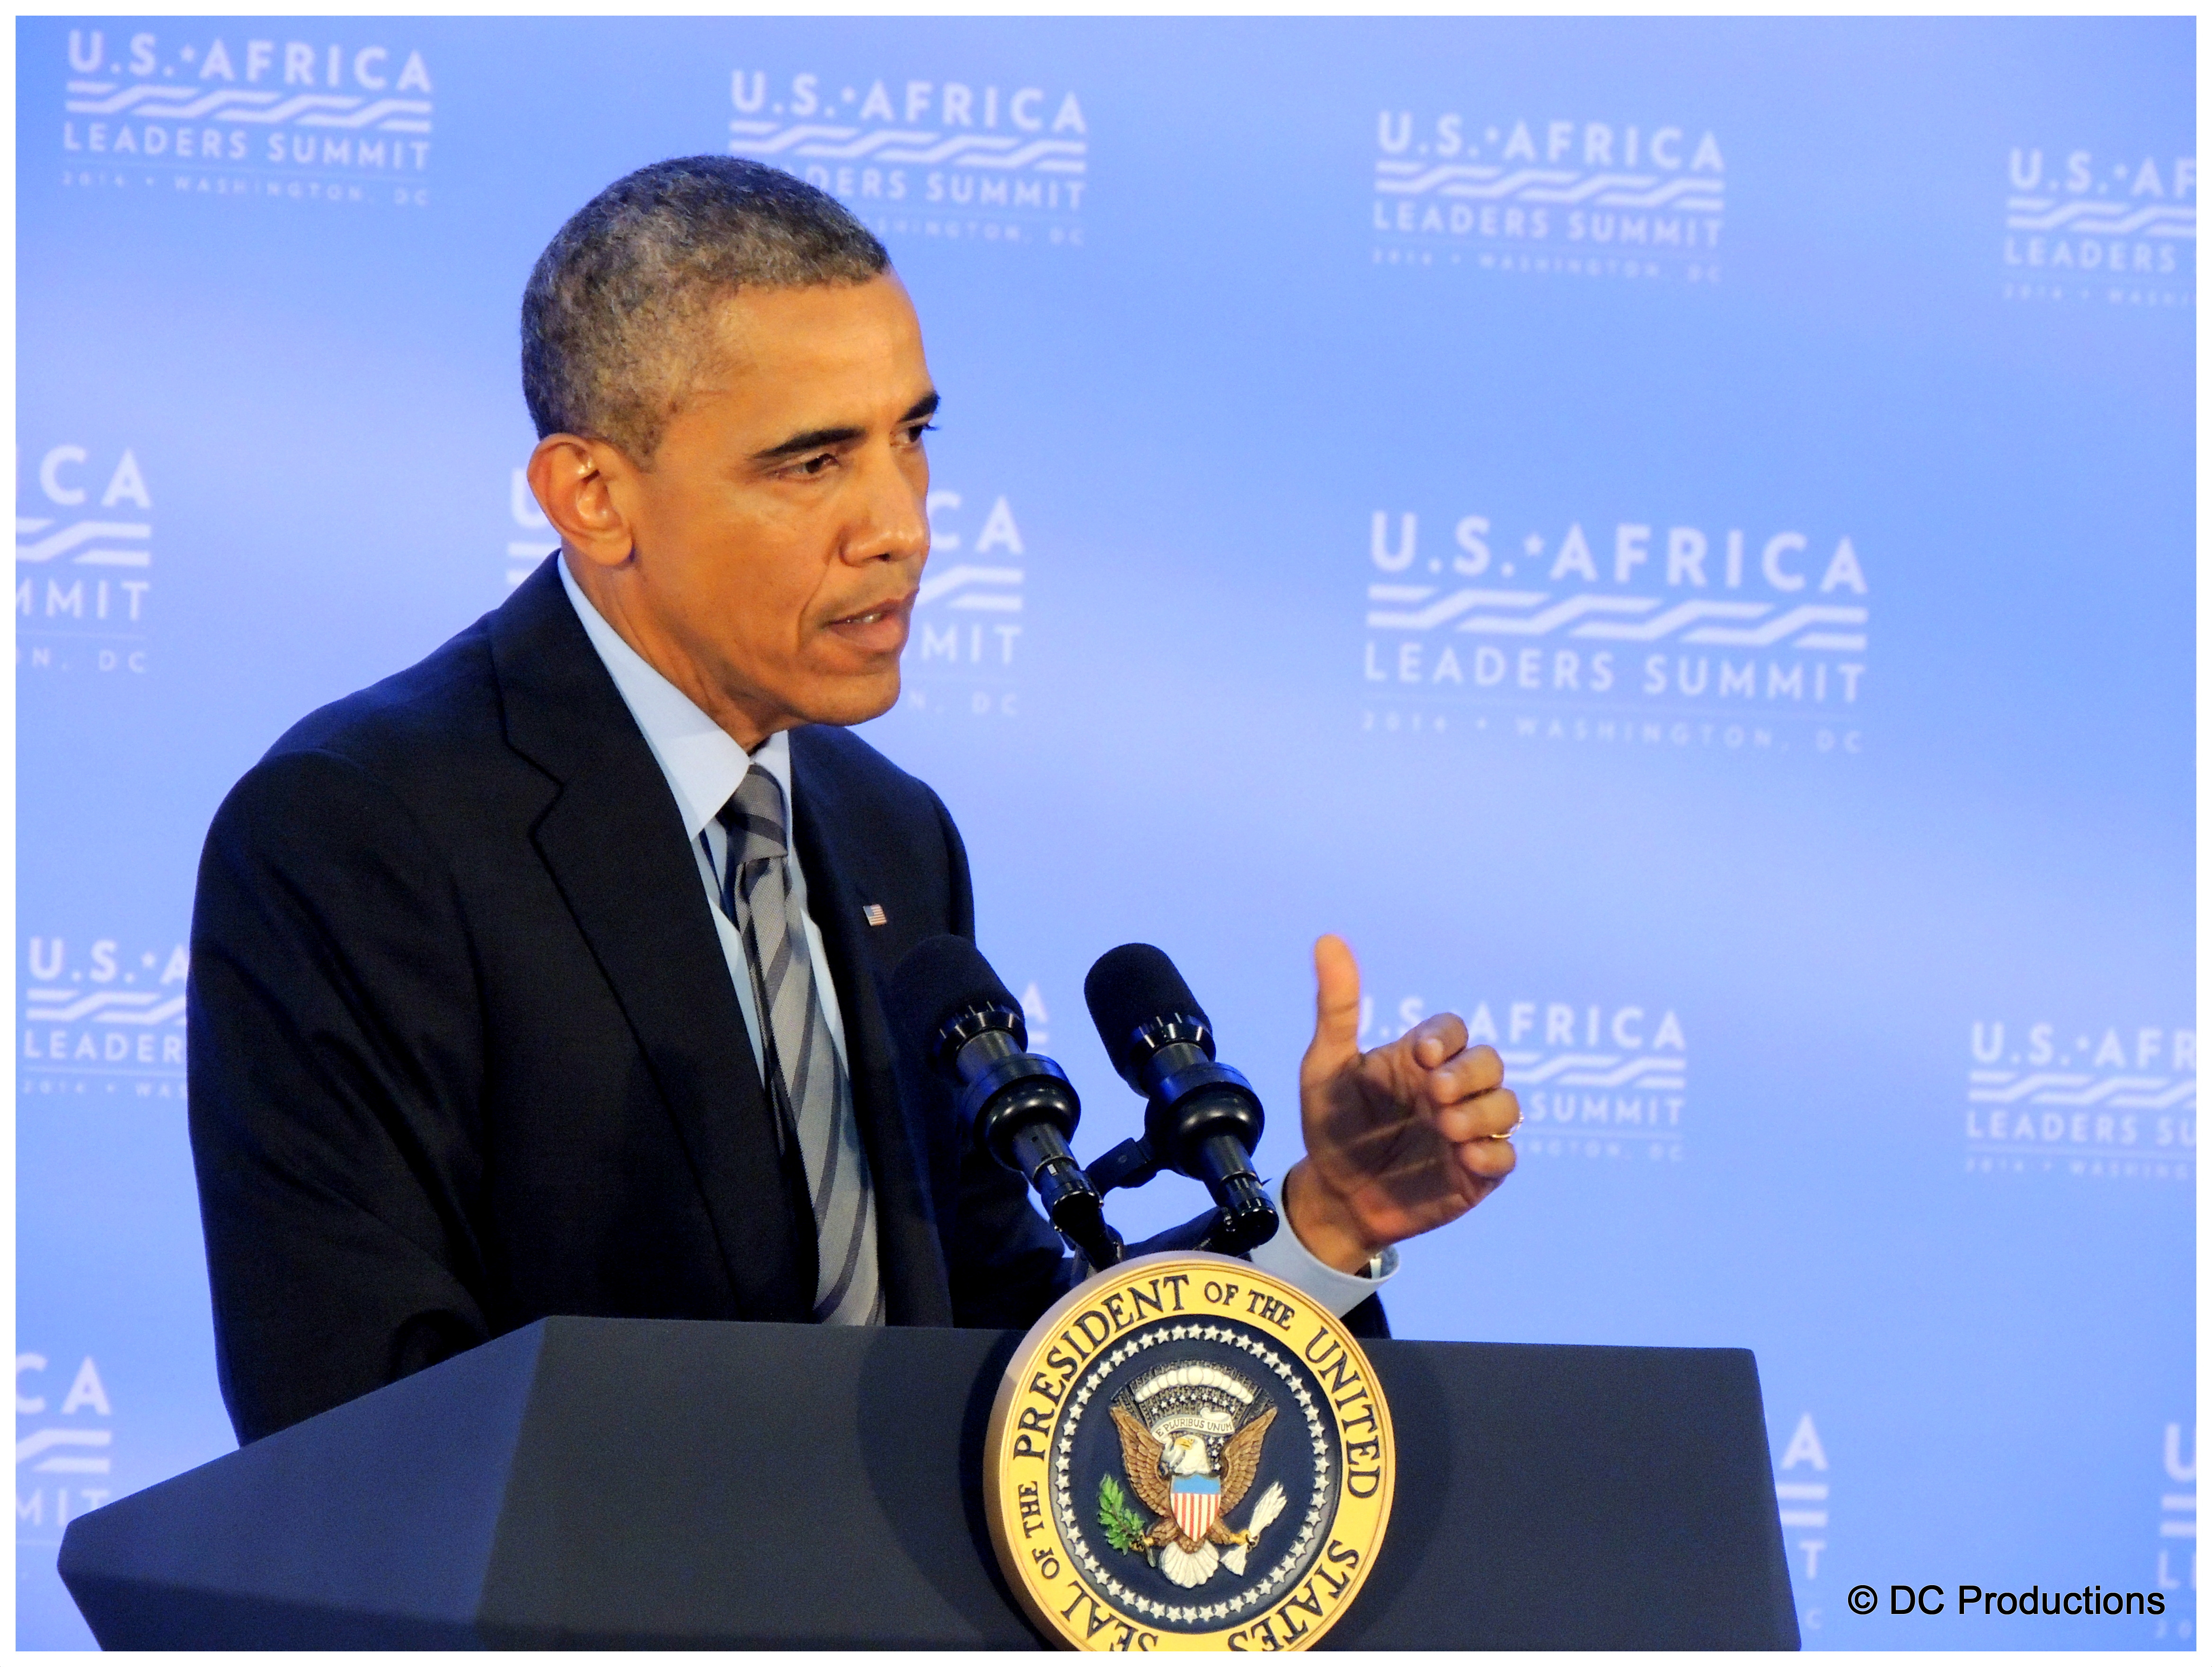 President Obama’s Live Press Conference during the U.S – Africa Leaders Summit in Washington DC